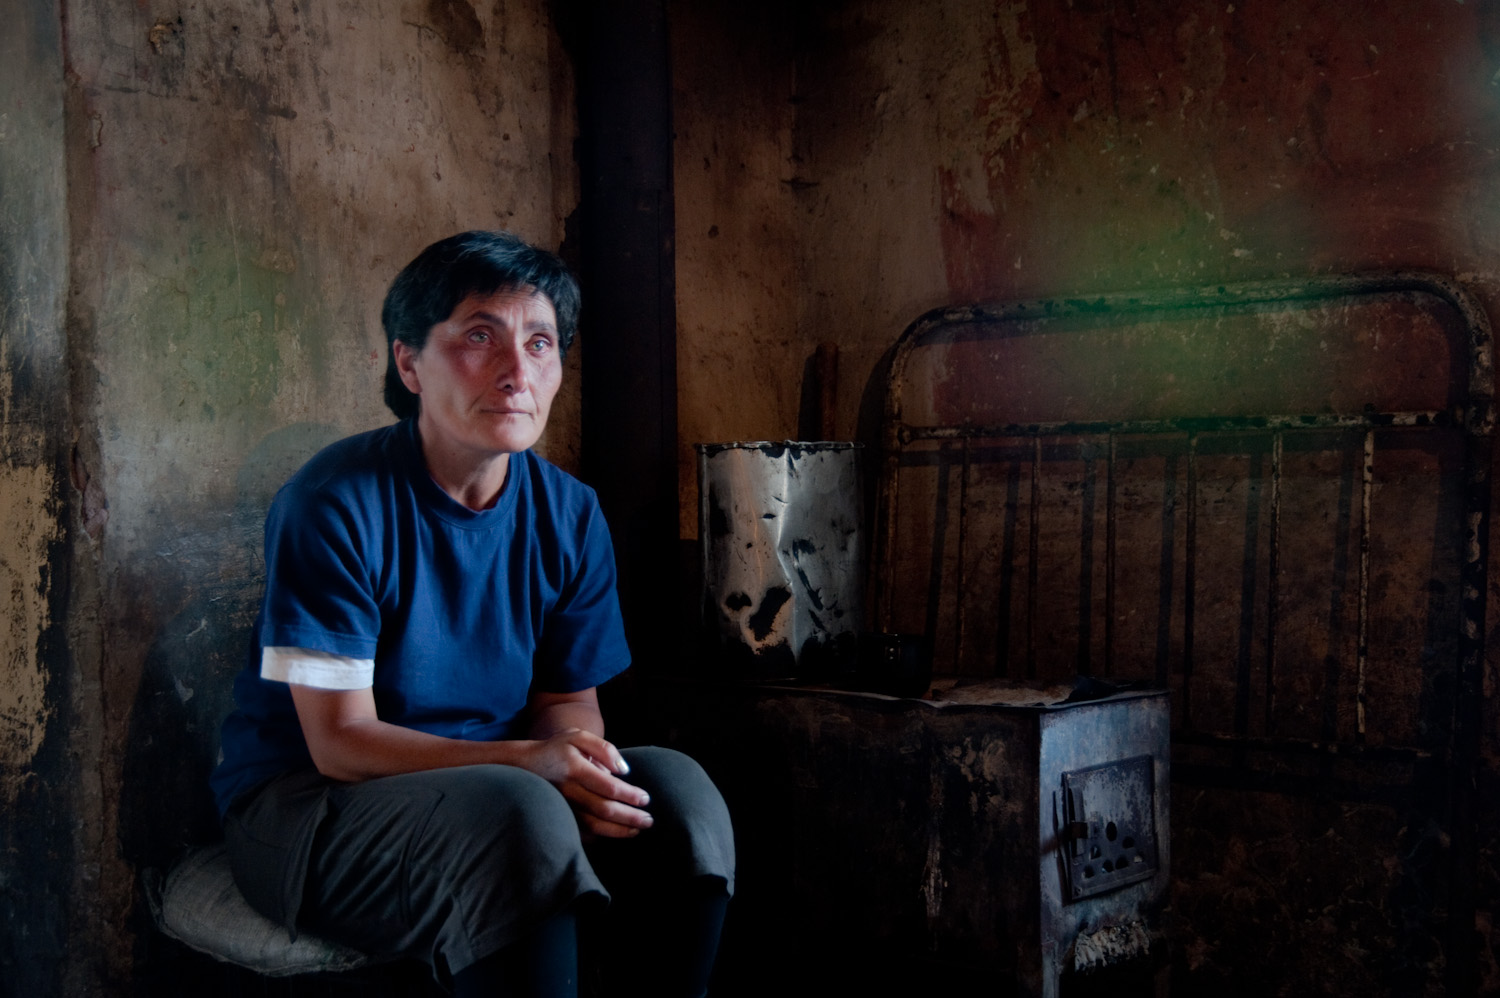  Nune lives with her 3 children in a run down house in Getap village. Her husband left for Russia and did not return. Her eldest son Vova (16) has not attended school in over 2 years because he is the family's primary breadwinner.  